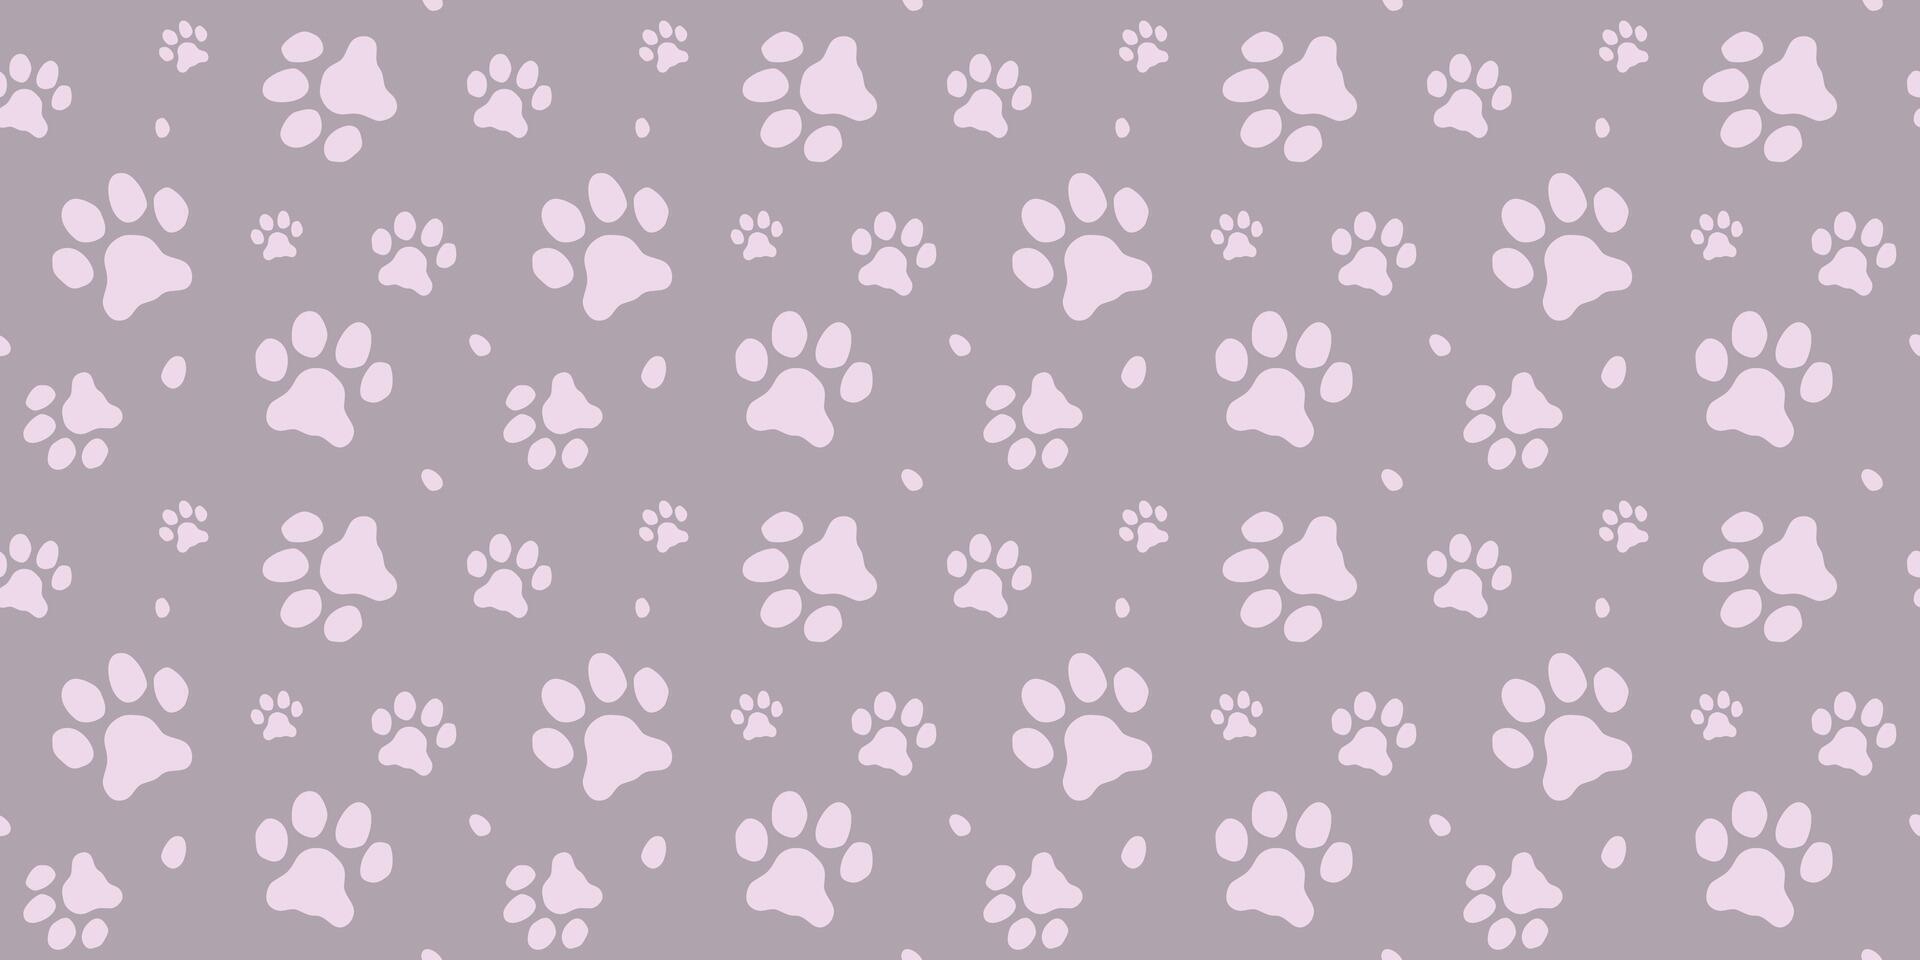 SSeamless pattern of paw footprint. Cat paw vector background